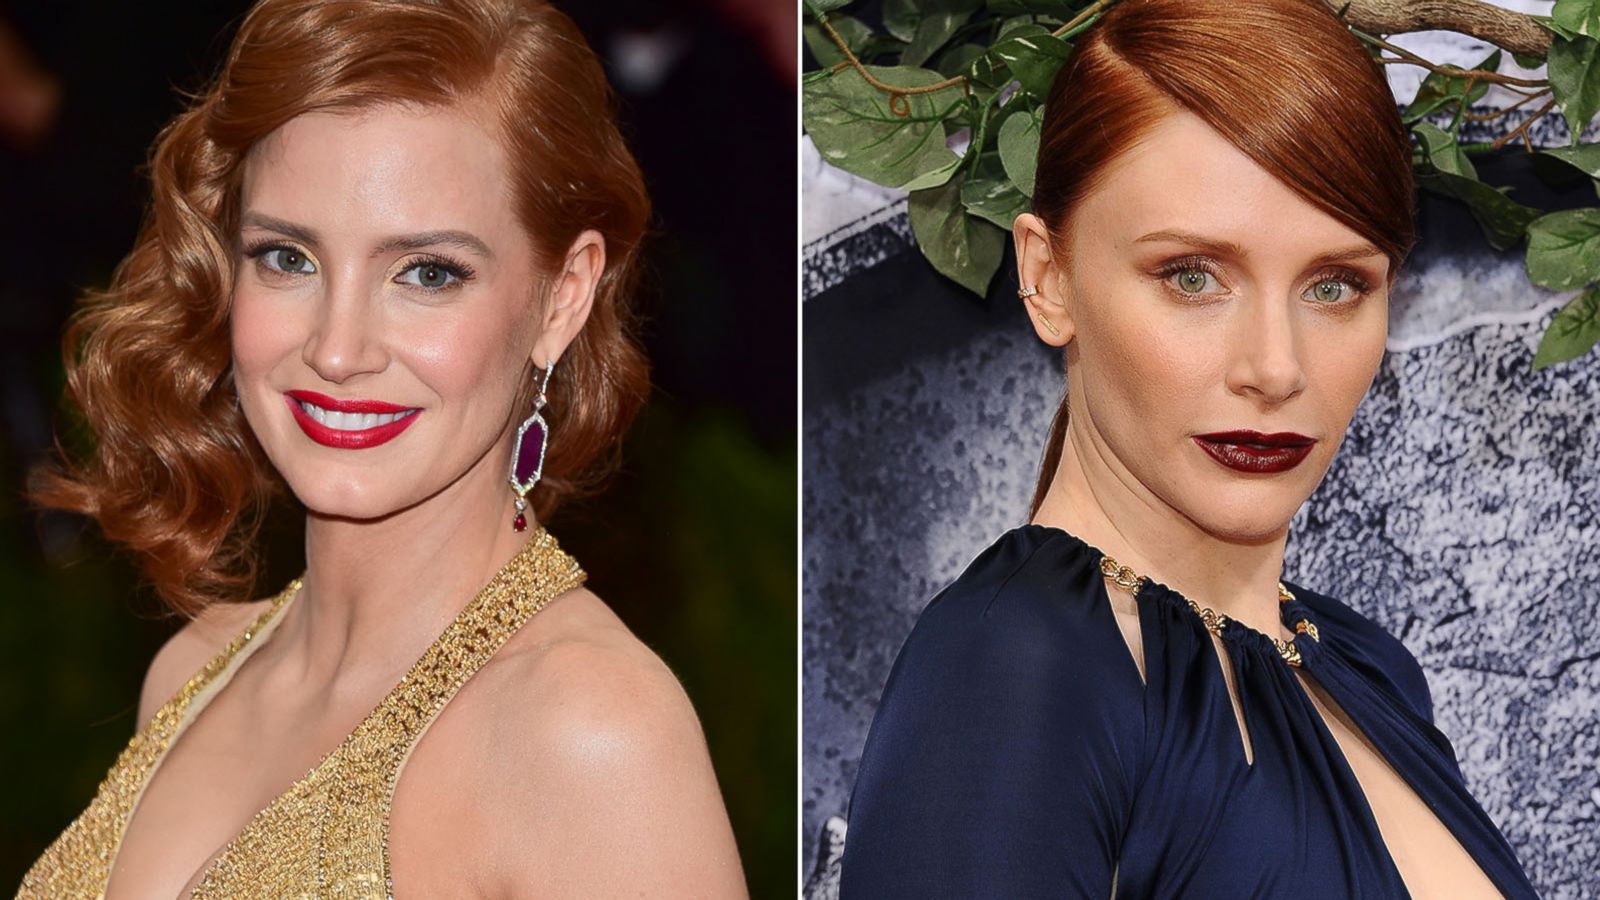 Jessica Chastain and Bryce Dallas Howard Are Not the Same Person - ABC News